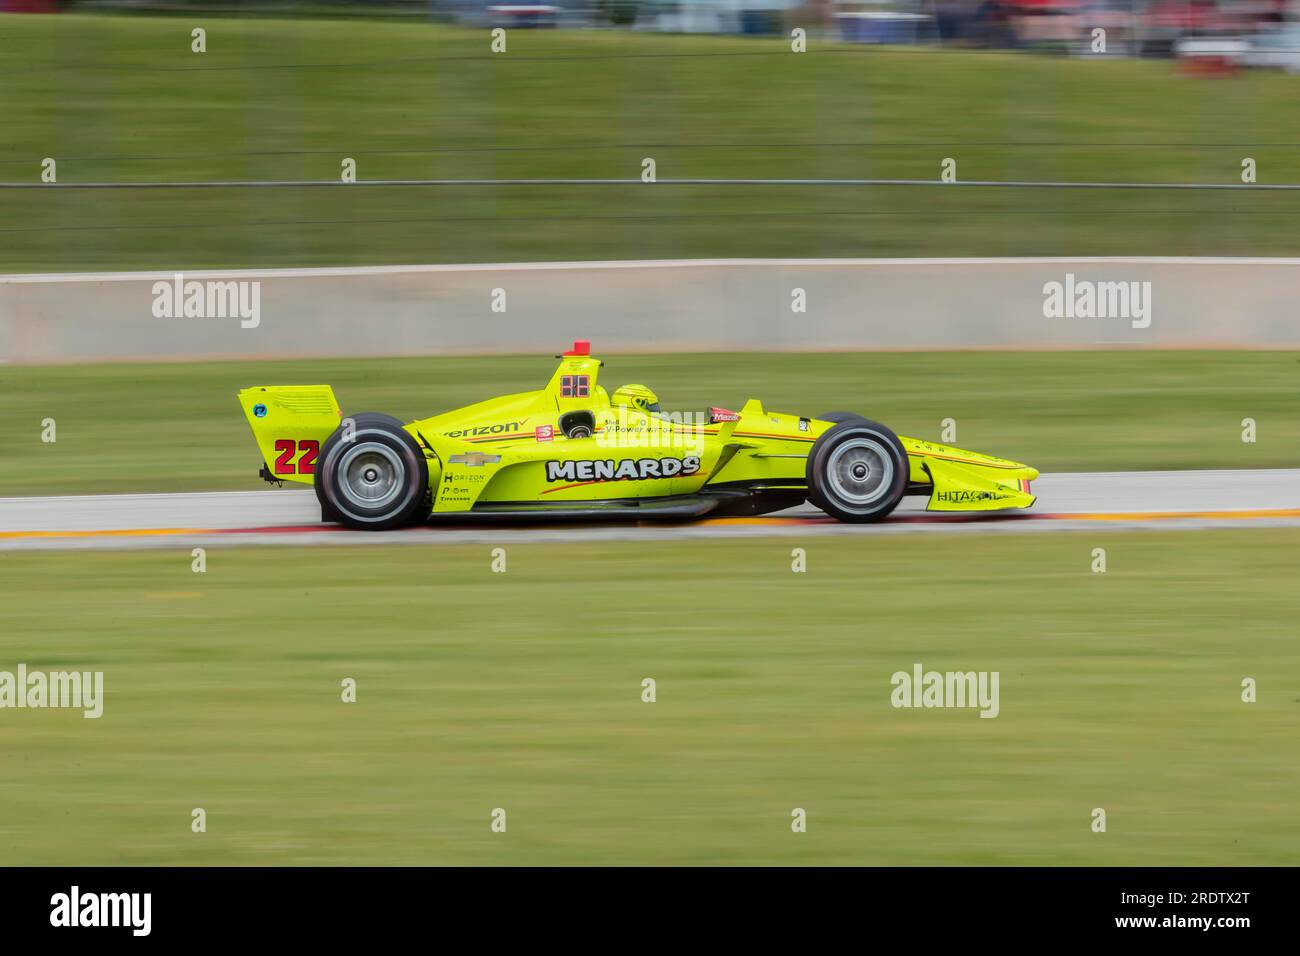 June 23, 2019, Elkhart Lake, Wisconsin, USA: SIMON PAGENAUD (22) of France races through the turns during the race for the REV Group Grand Prix at Stock Photo